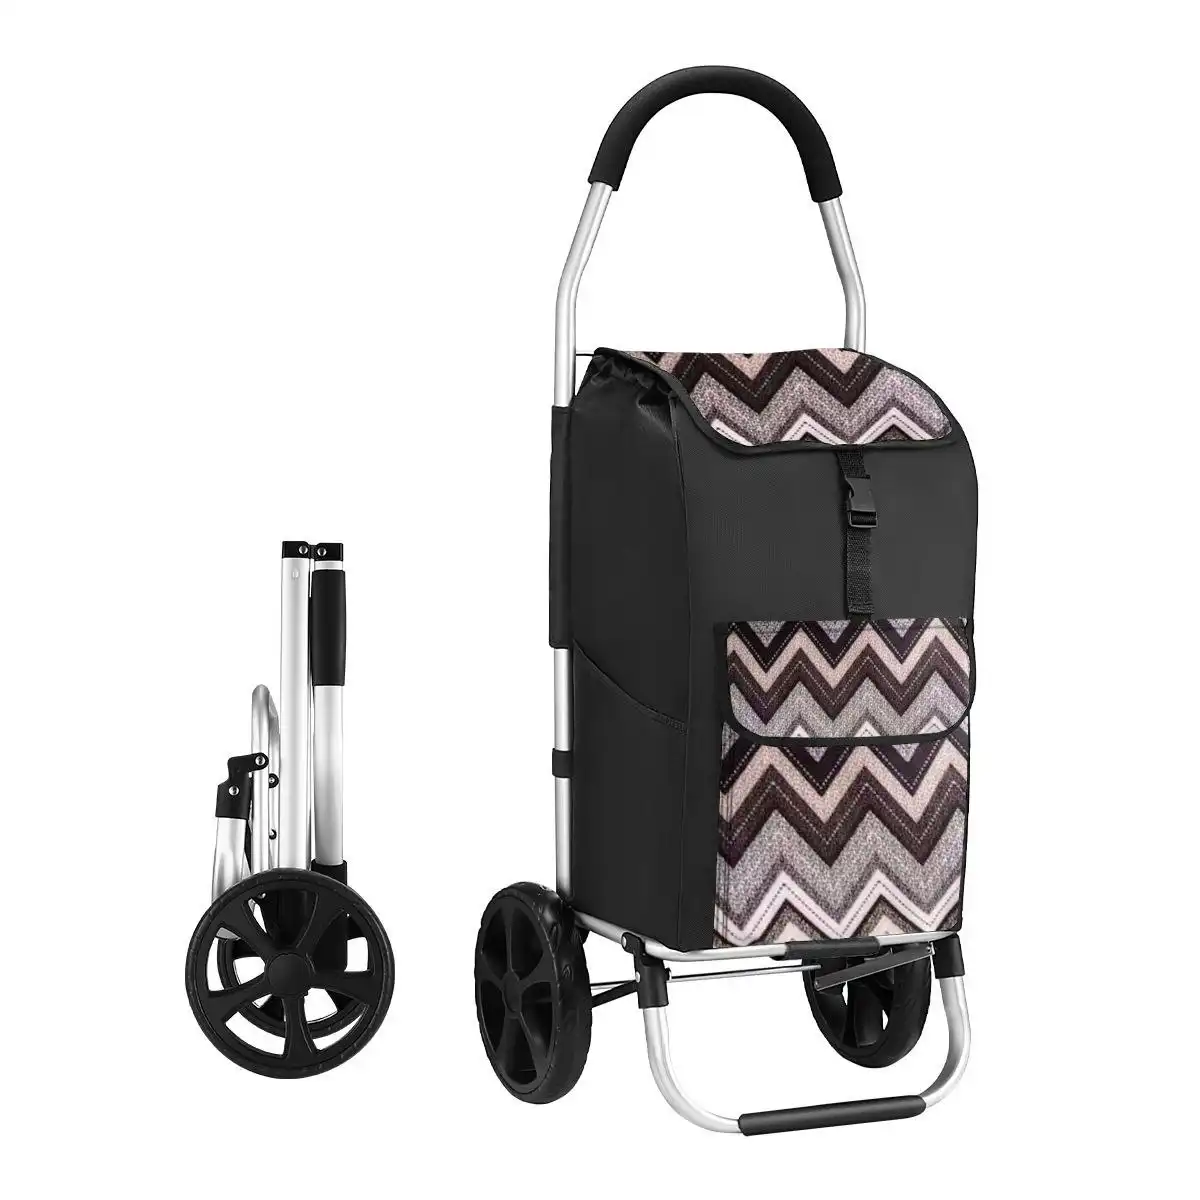 Ausway Foldable Aluminium Shopping Trolley with Bags Dolly Grocery Cart on Wheels Black